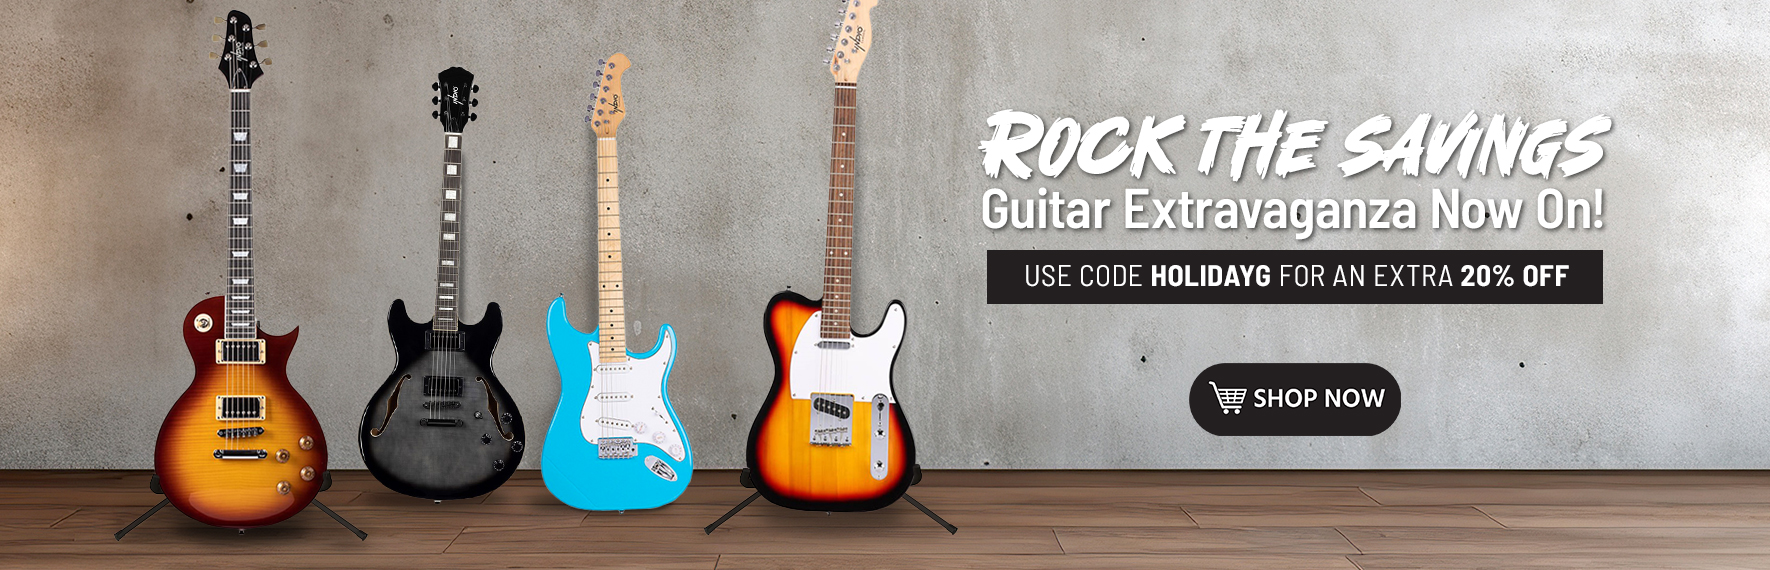 Rock the Savings Guitar Extravaganza Now On! Use Code: HOLIDAYG For an Extra 20% OFF Shop Now